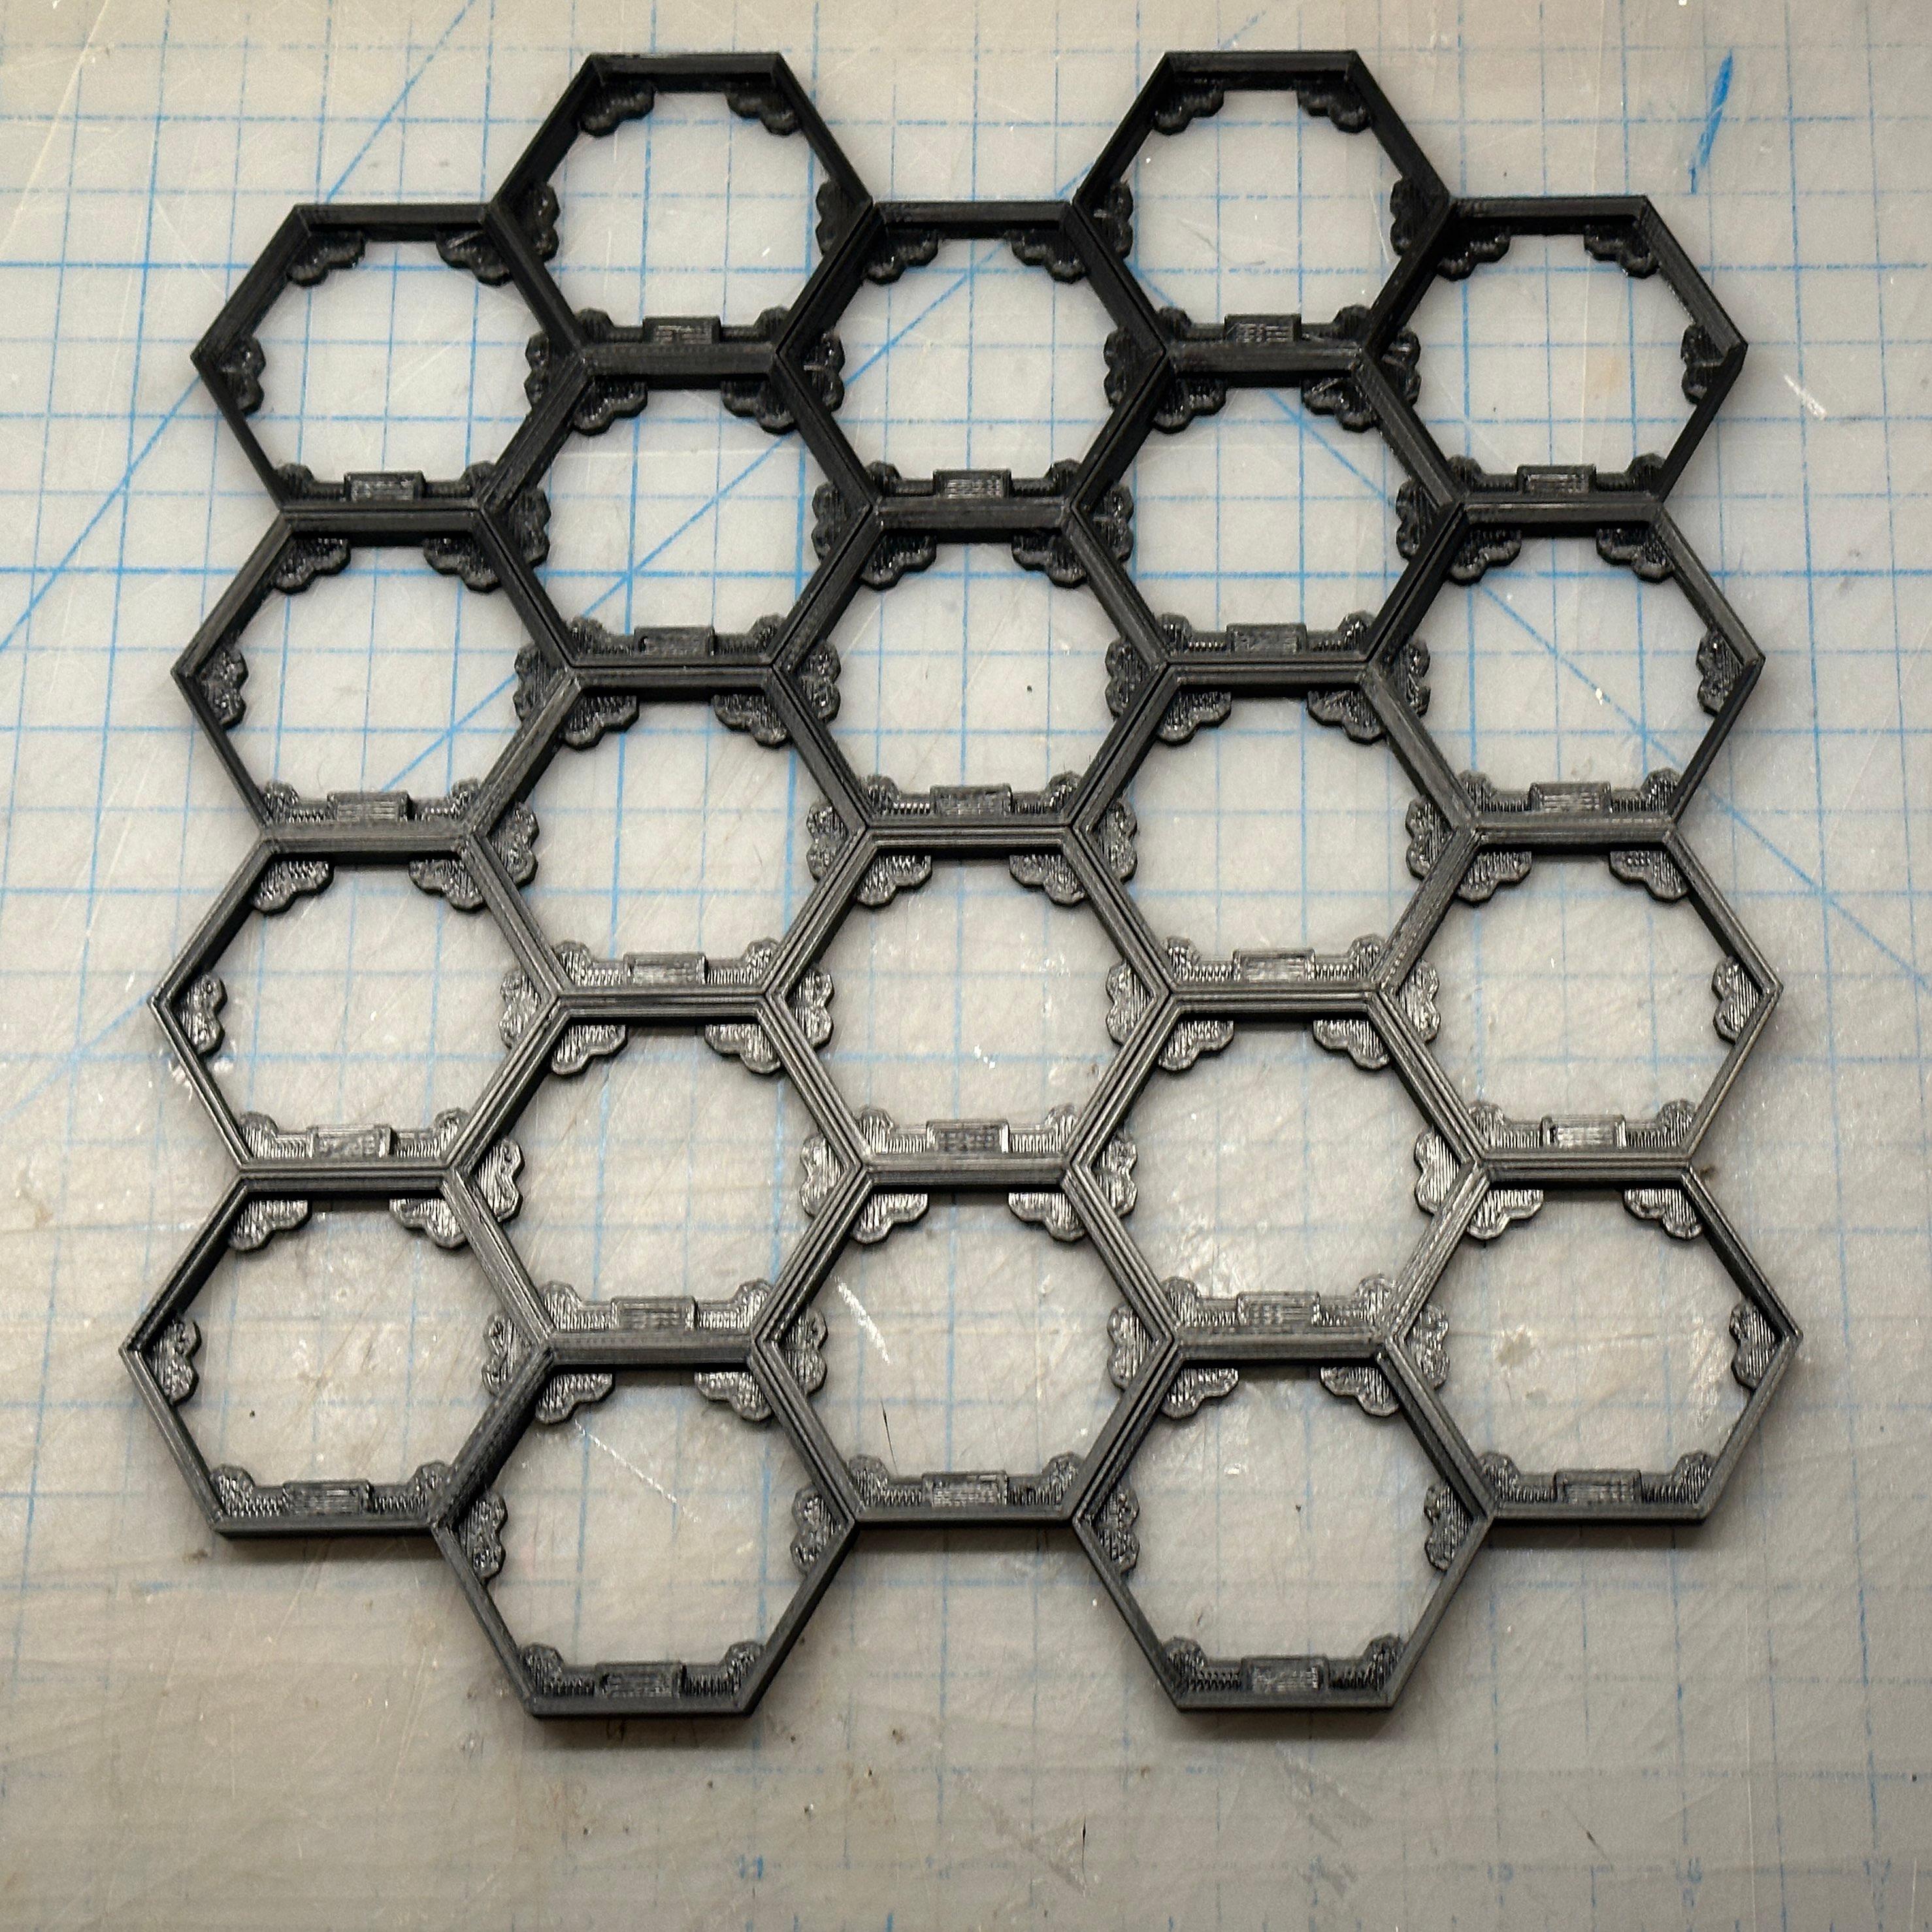 Hextraction_Board_[for small printers] 3d model